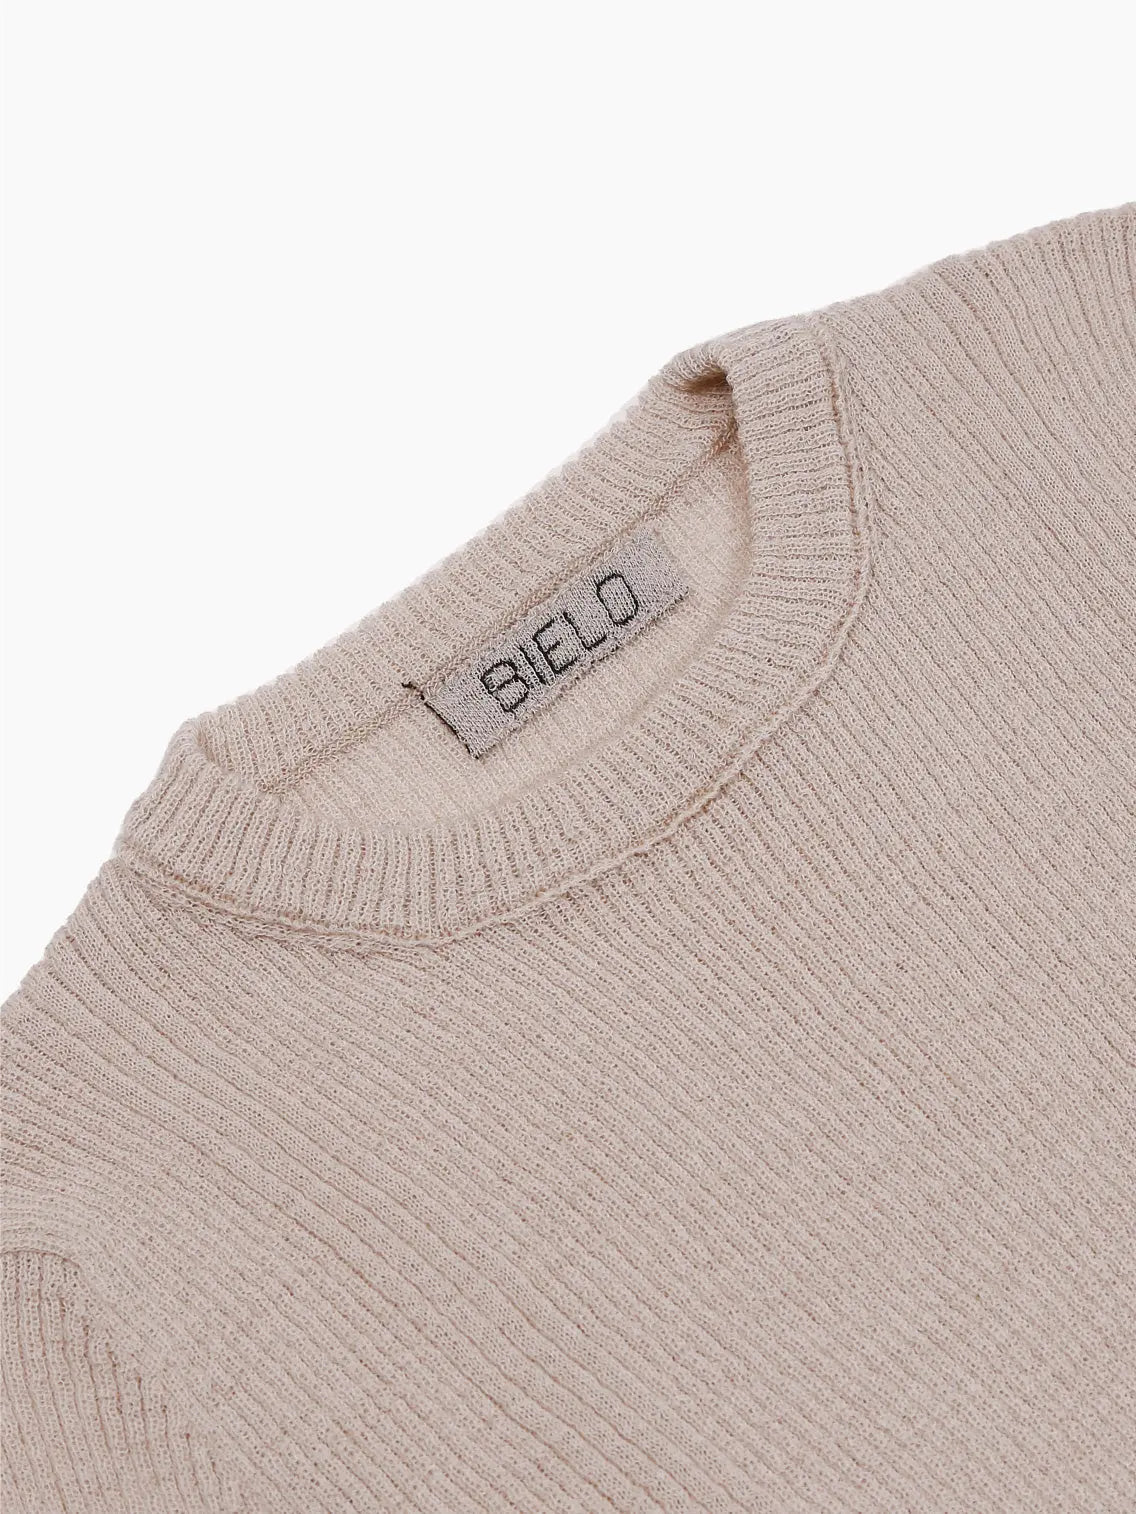 A beige, short-sleeved sweater with a ribbed texture. The sweater has a crew neckline and appears to be made of soft, knit fabric. The brand label "Bielo" from bassalstore is visible inside the collar. The Masho Ecru is laid flat against a white background, perfect for exploring Barcelona's streets in comfort and style.
